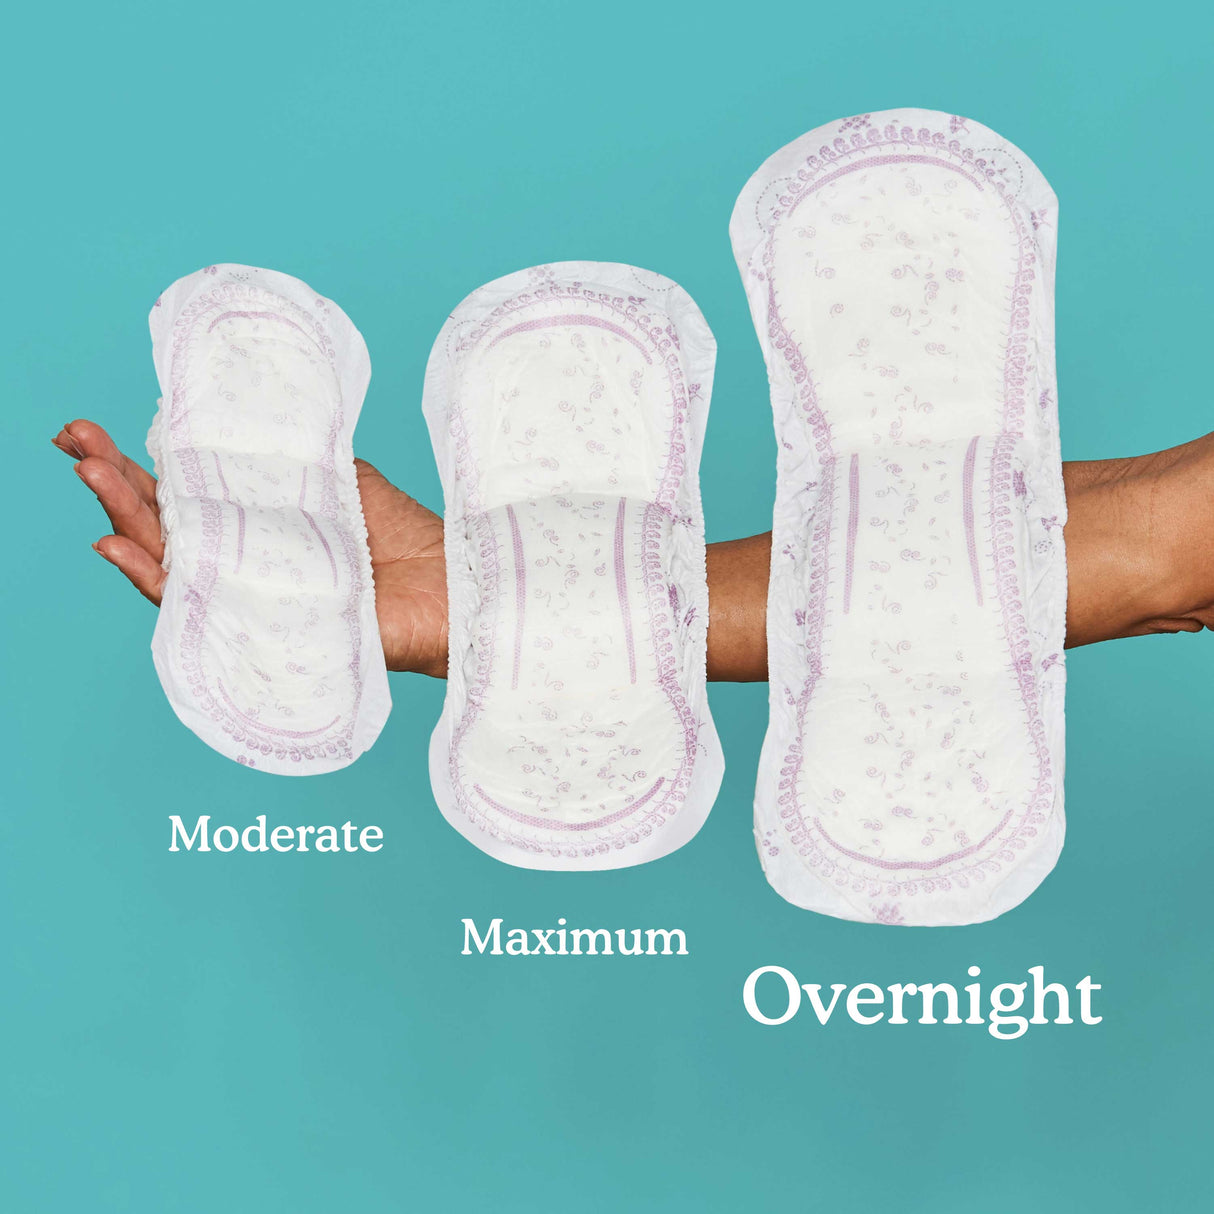 What are Incontinence Pads + How Do They Work? – Because Market